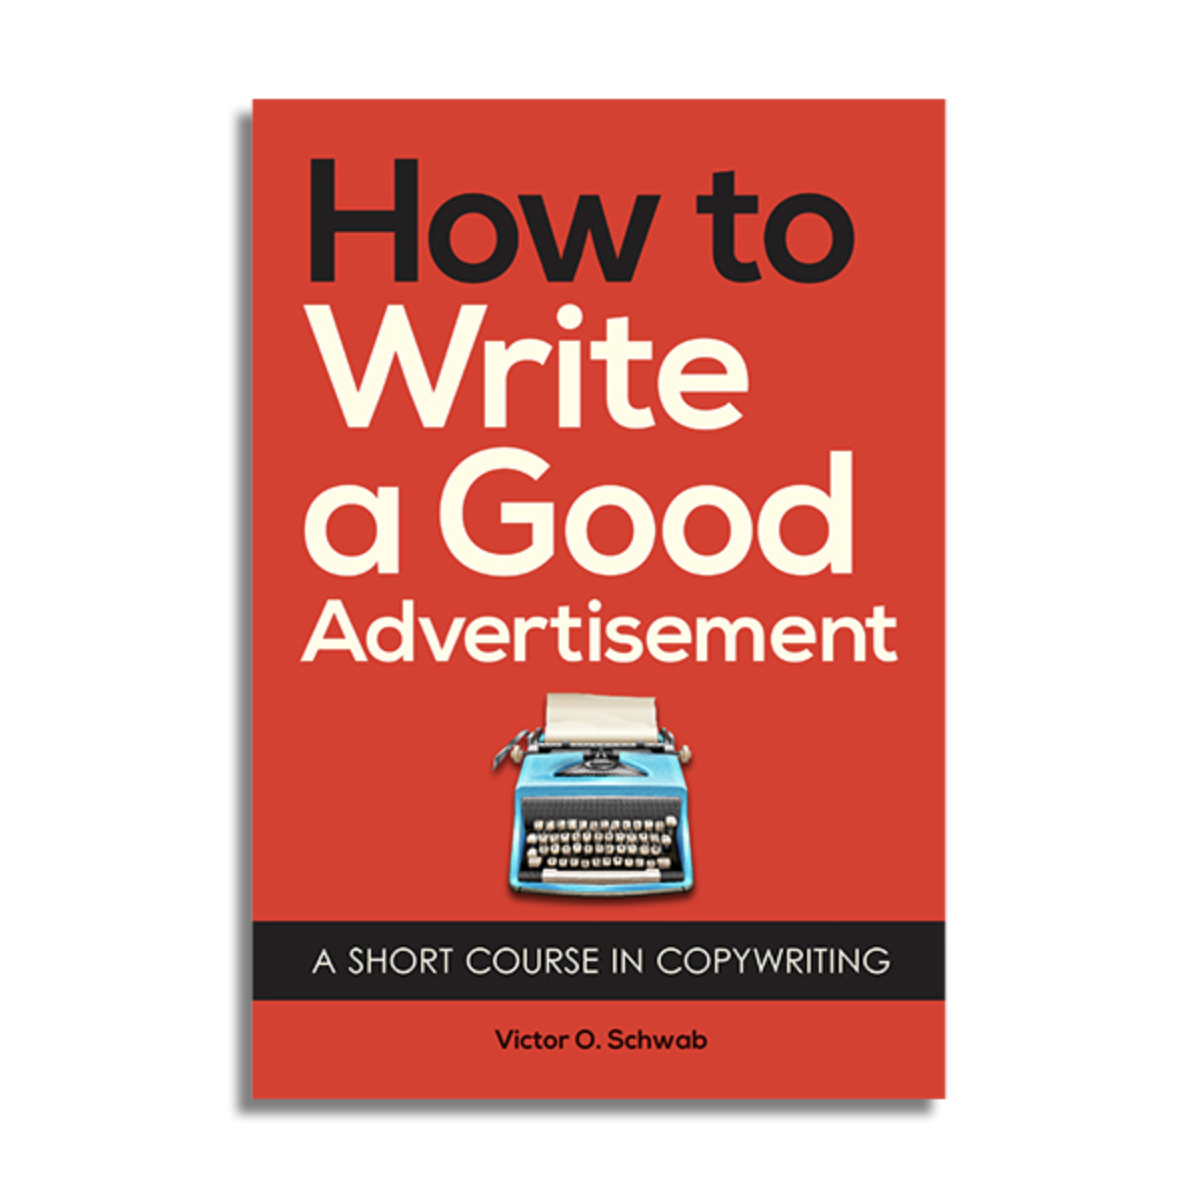 How to Write a Good Advertisement — Echo Point Books & Media, LLC.